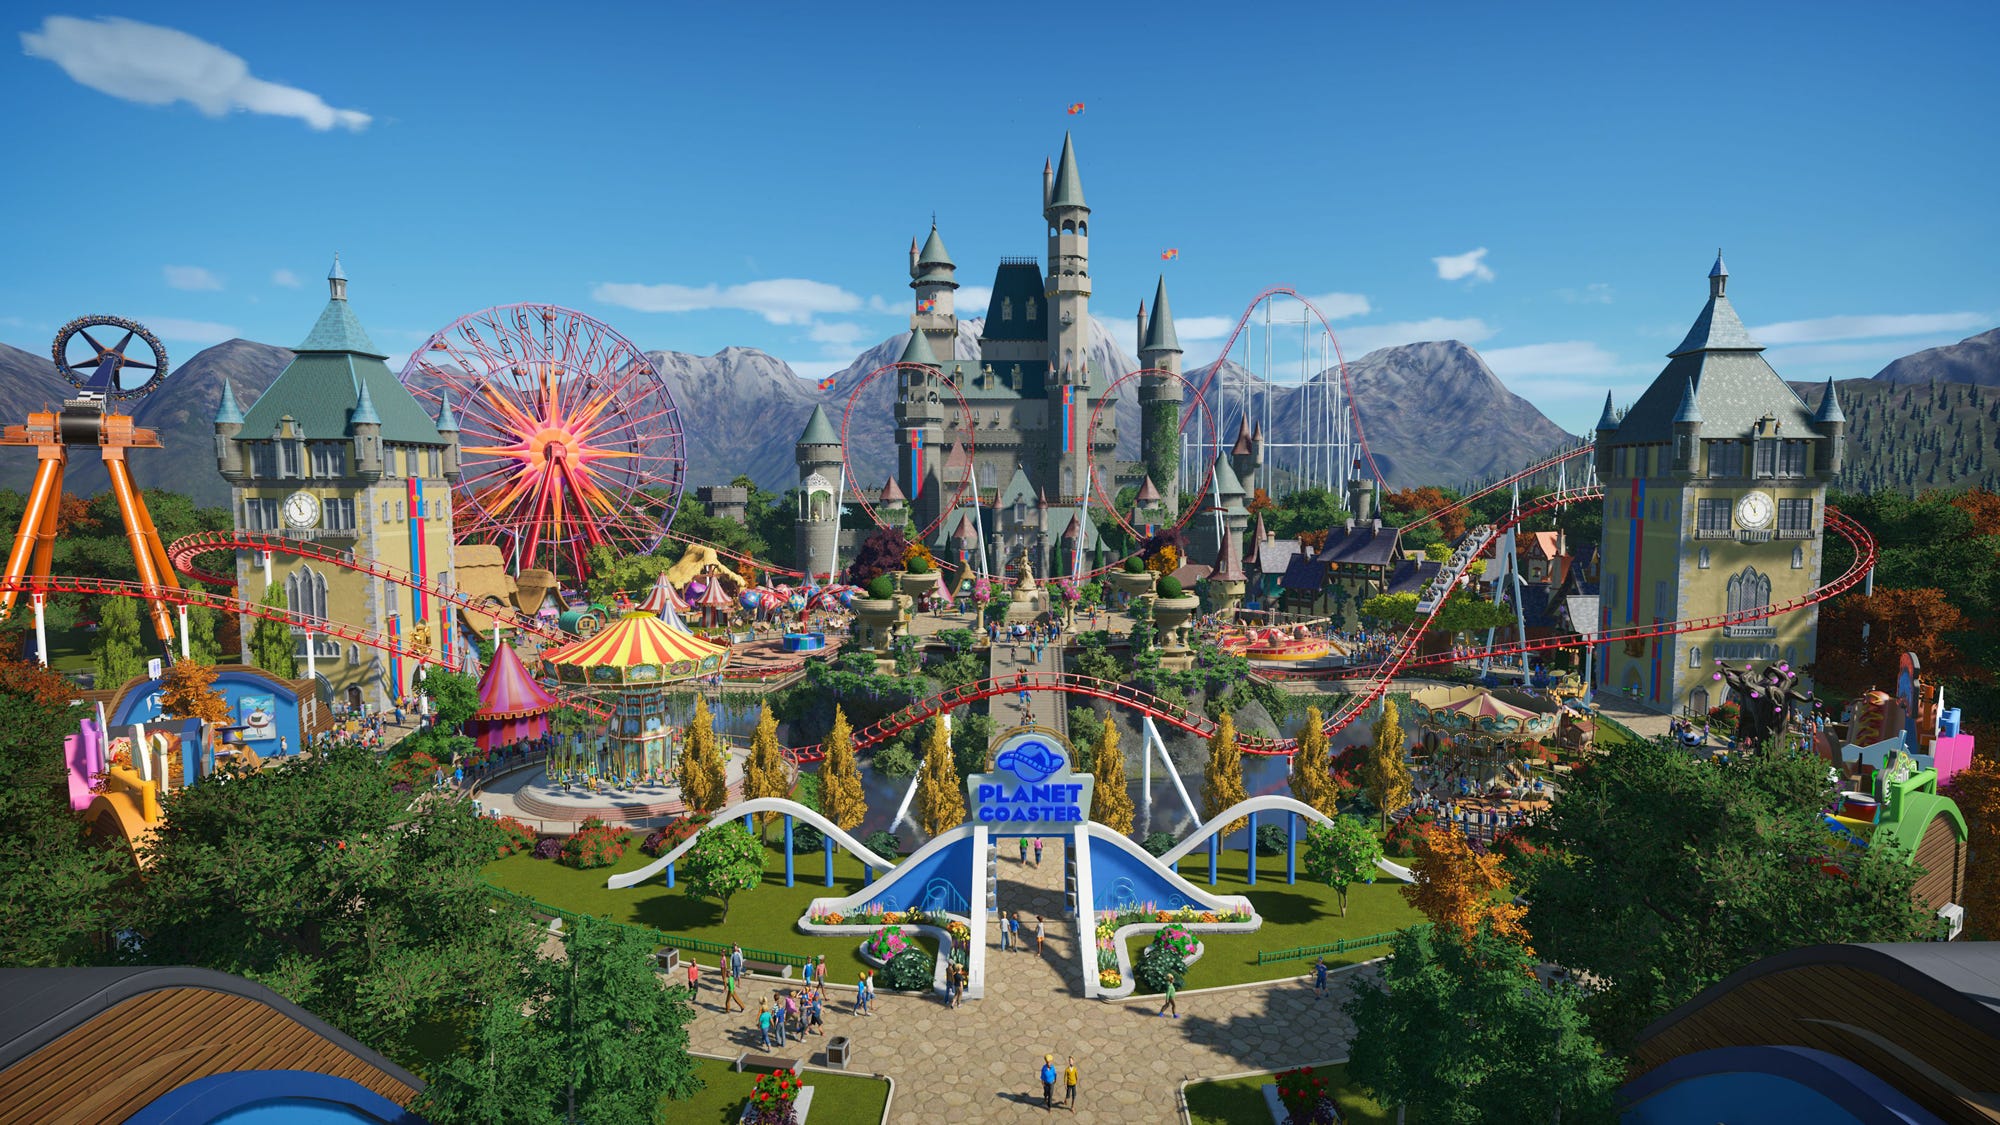 Video game review: 'Planet Coaster: Edition' return to theme park glory